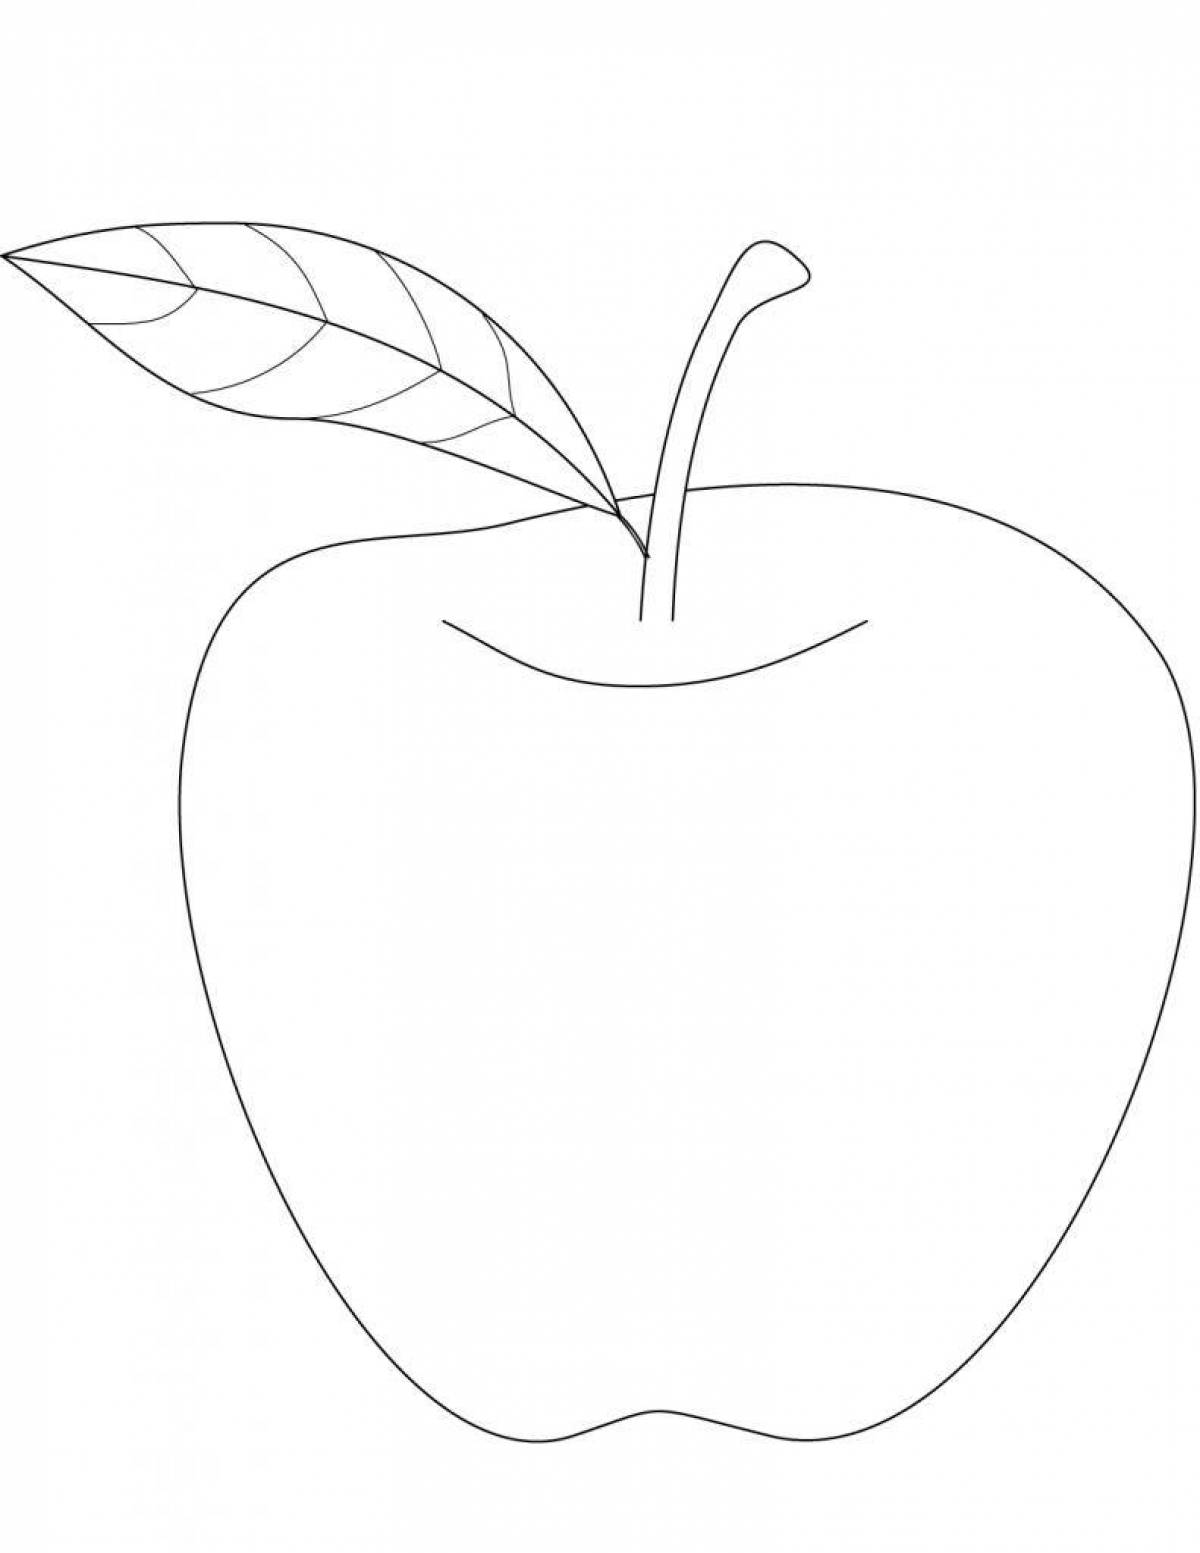 Playful drawing of an apple